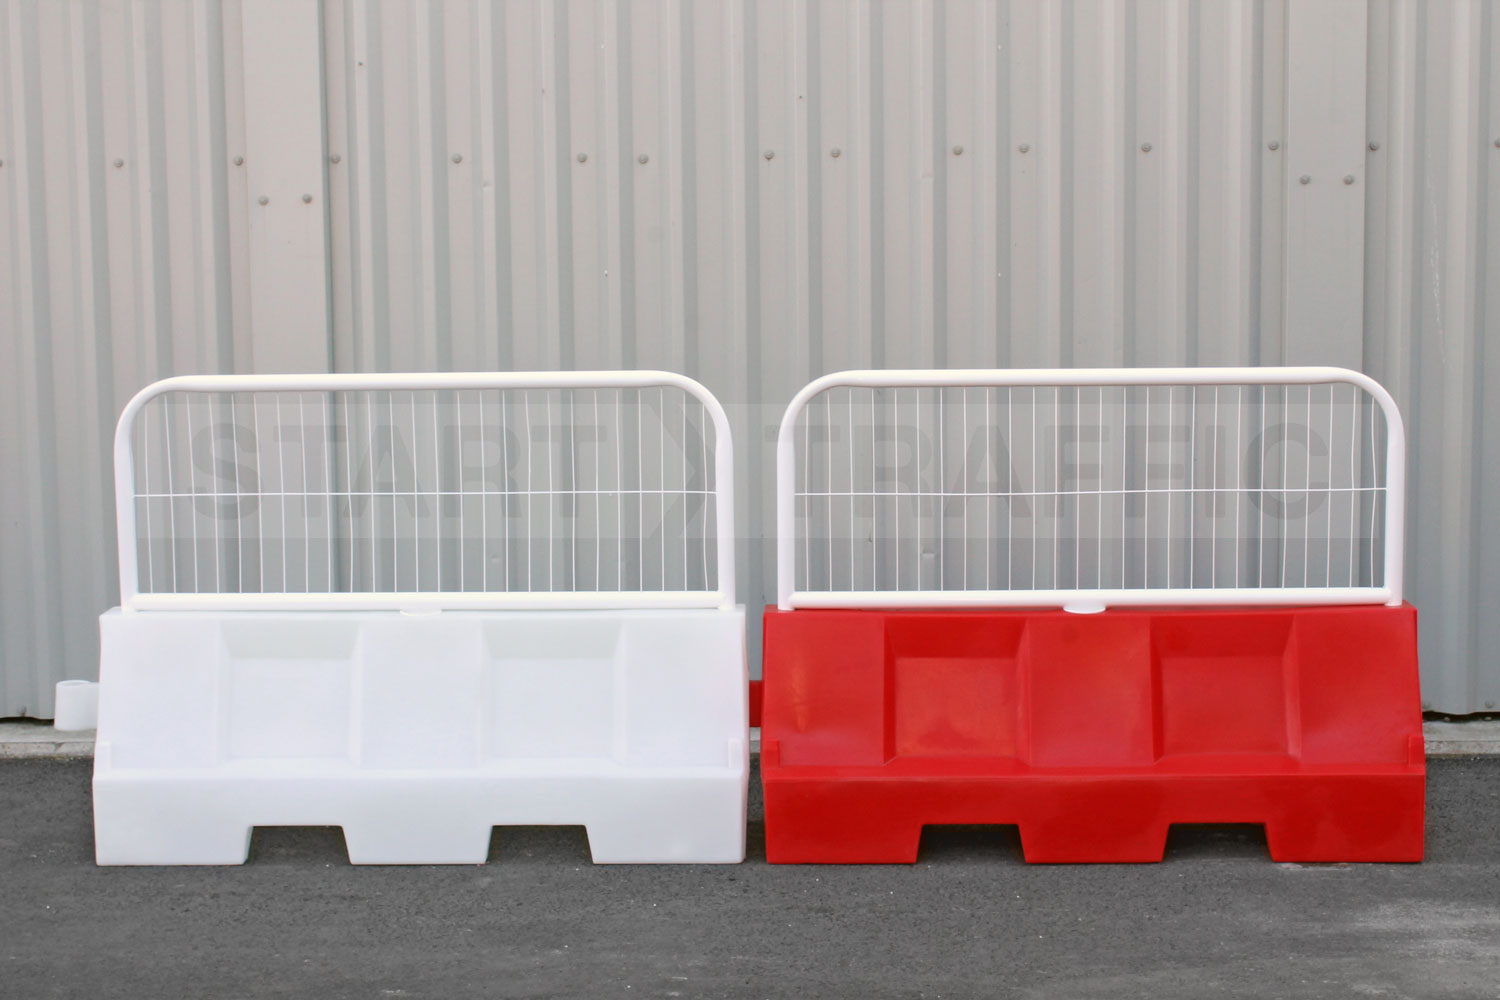 Image Of 1.5EVO Barrier With Fence Top